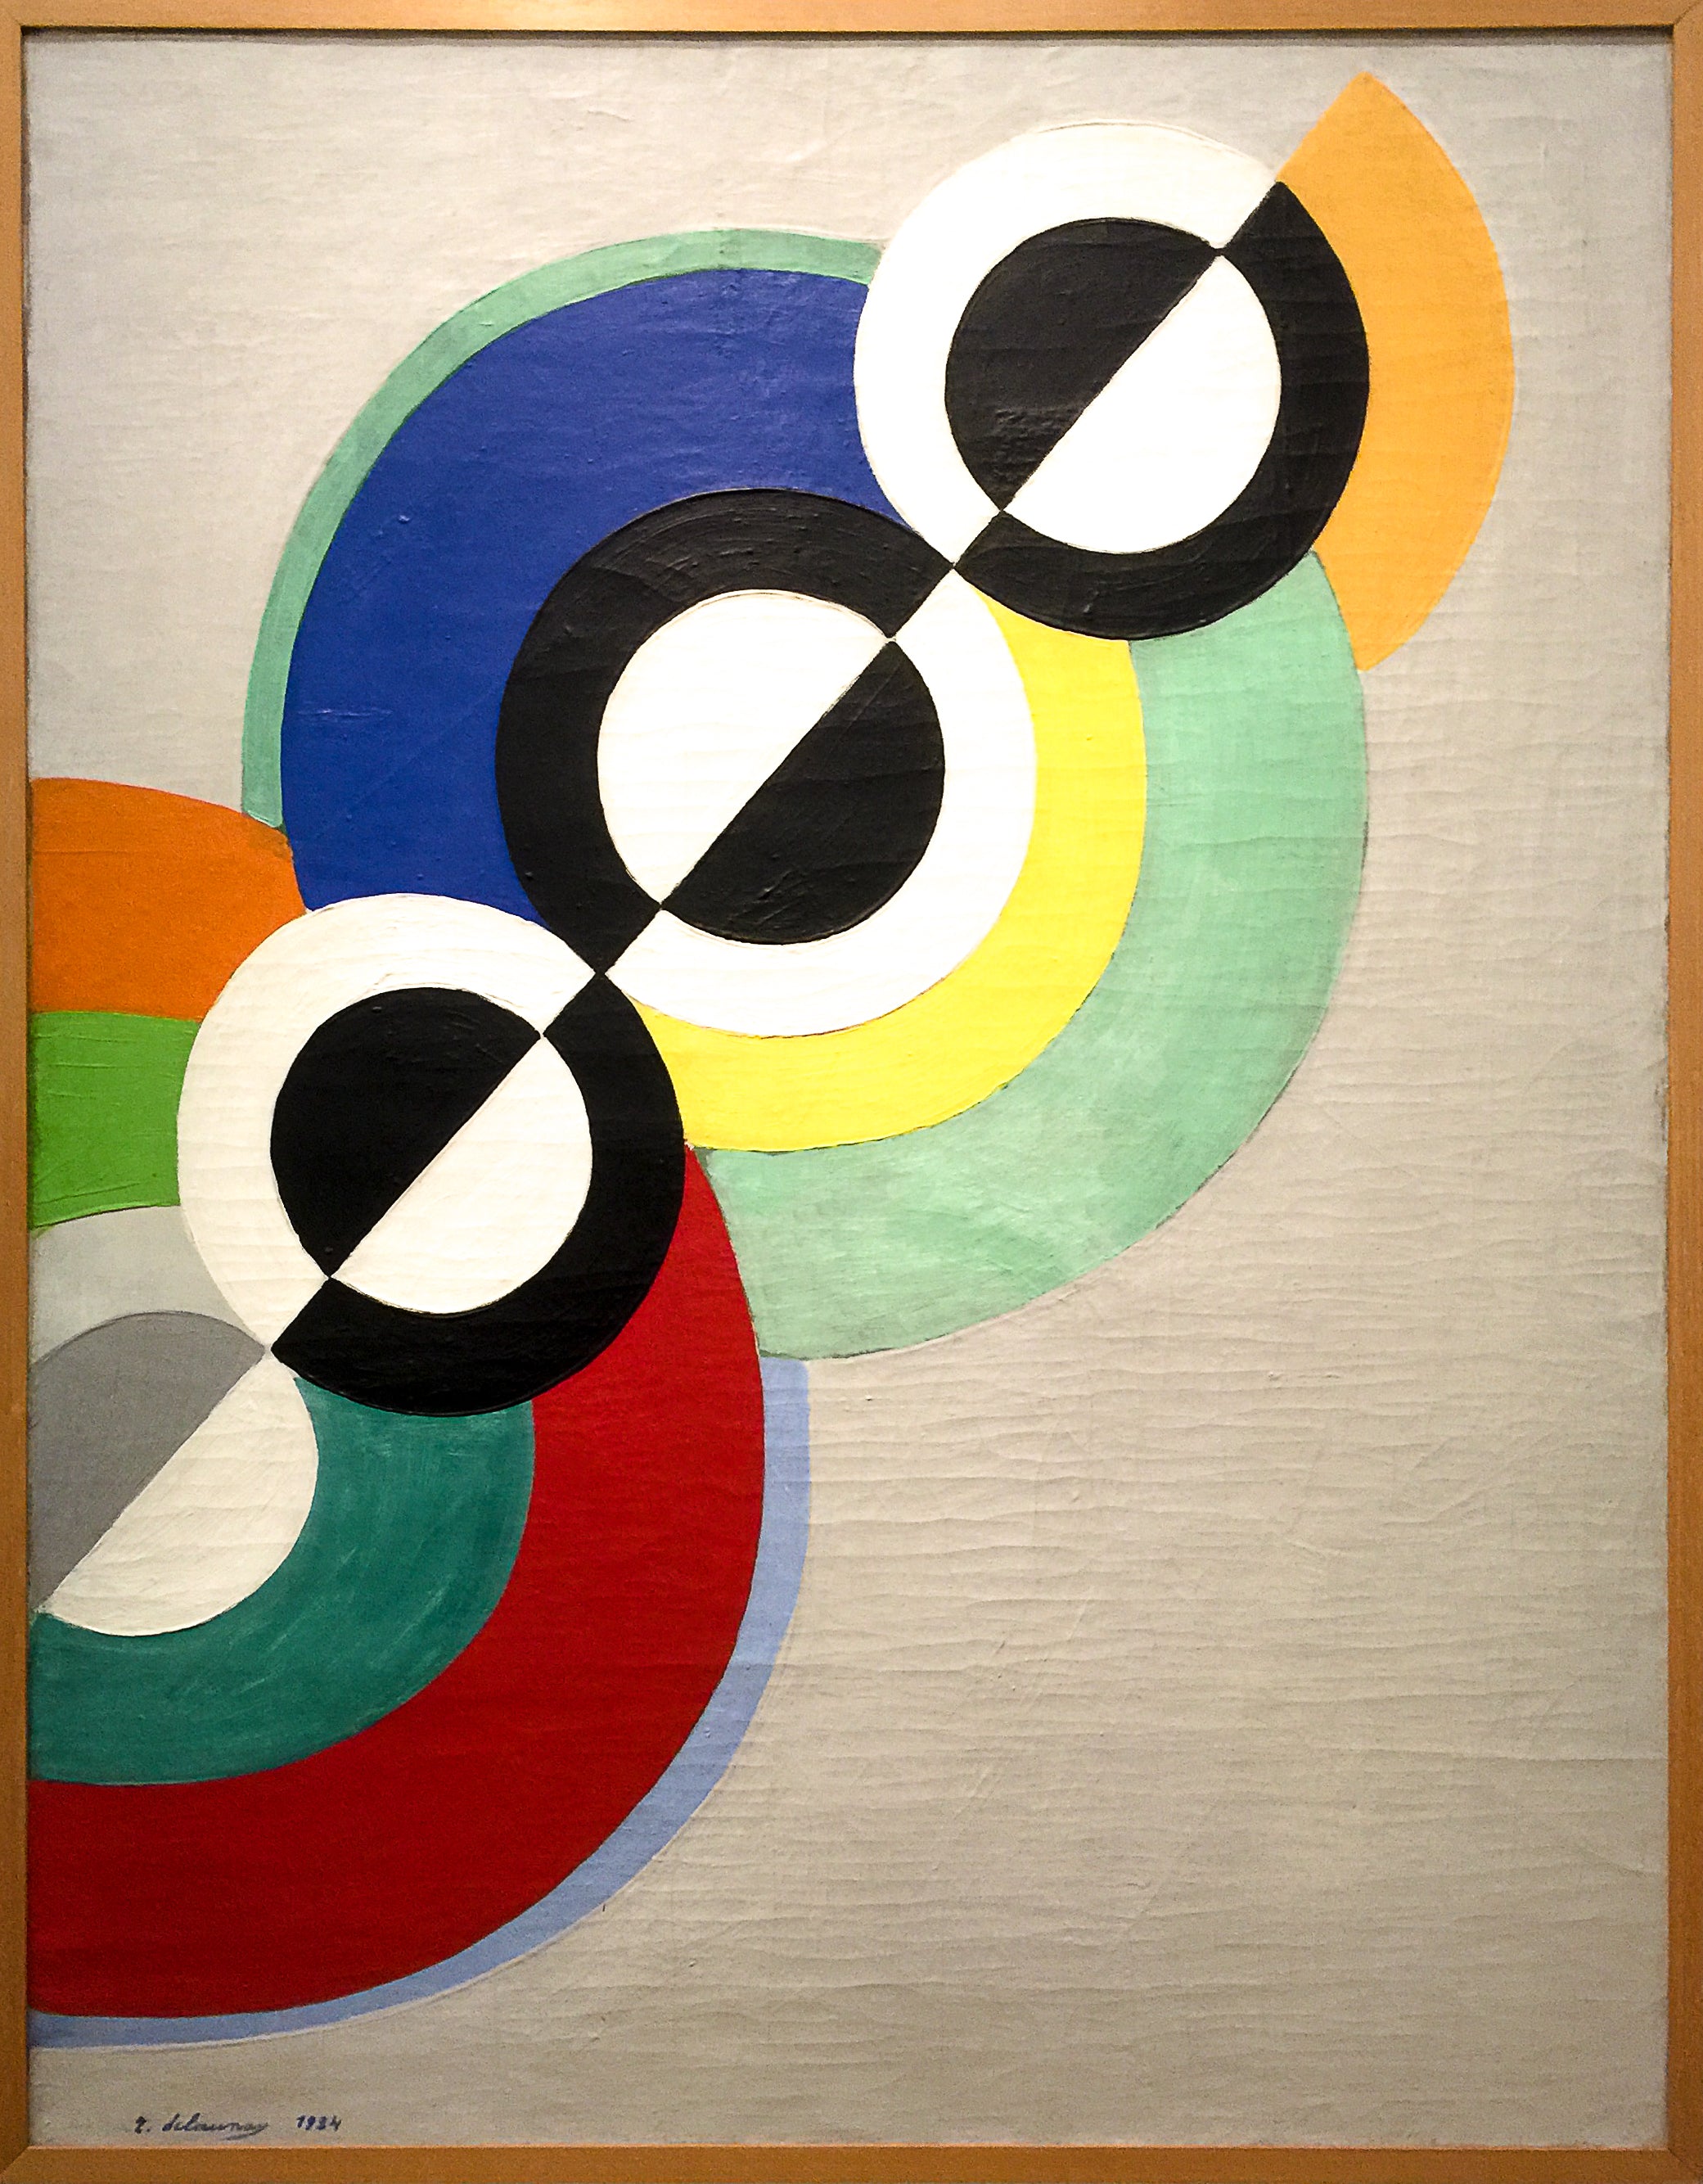 Robert Delaunay: Orphism and the Birth of Abstract Art